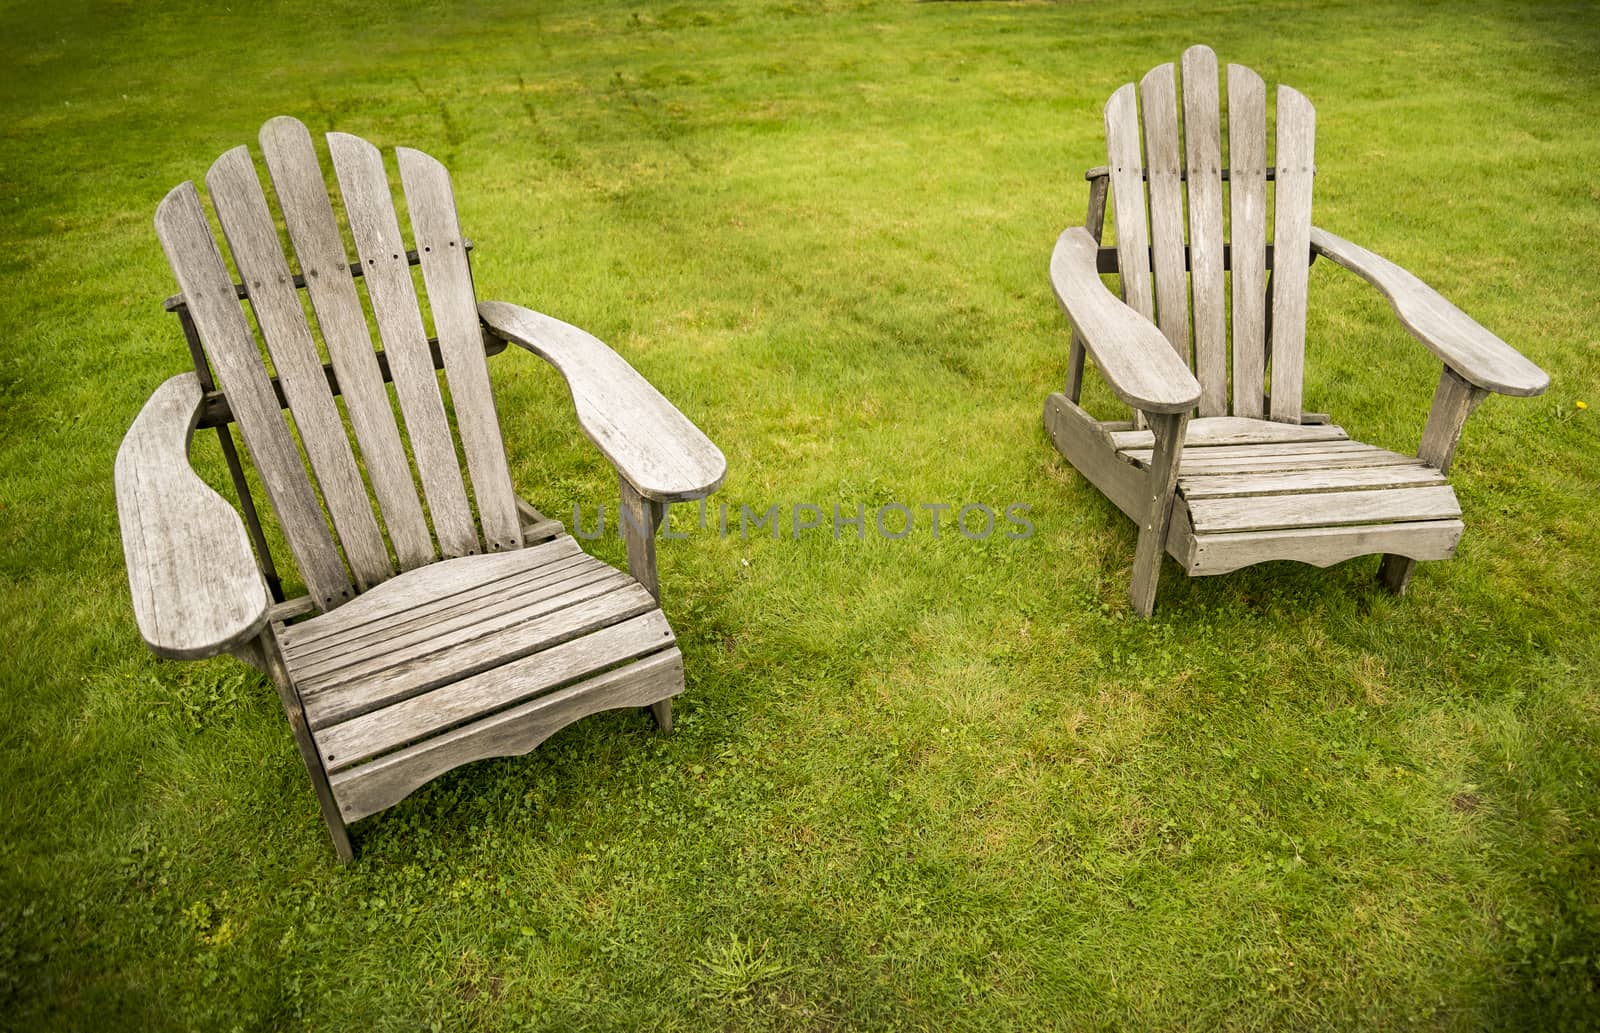 two adirondack chairs on the grass in Maine, USA